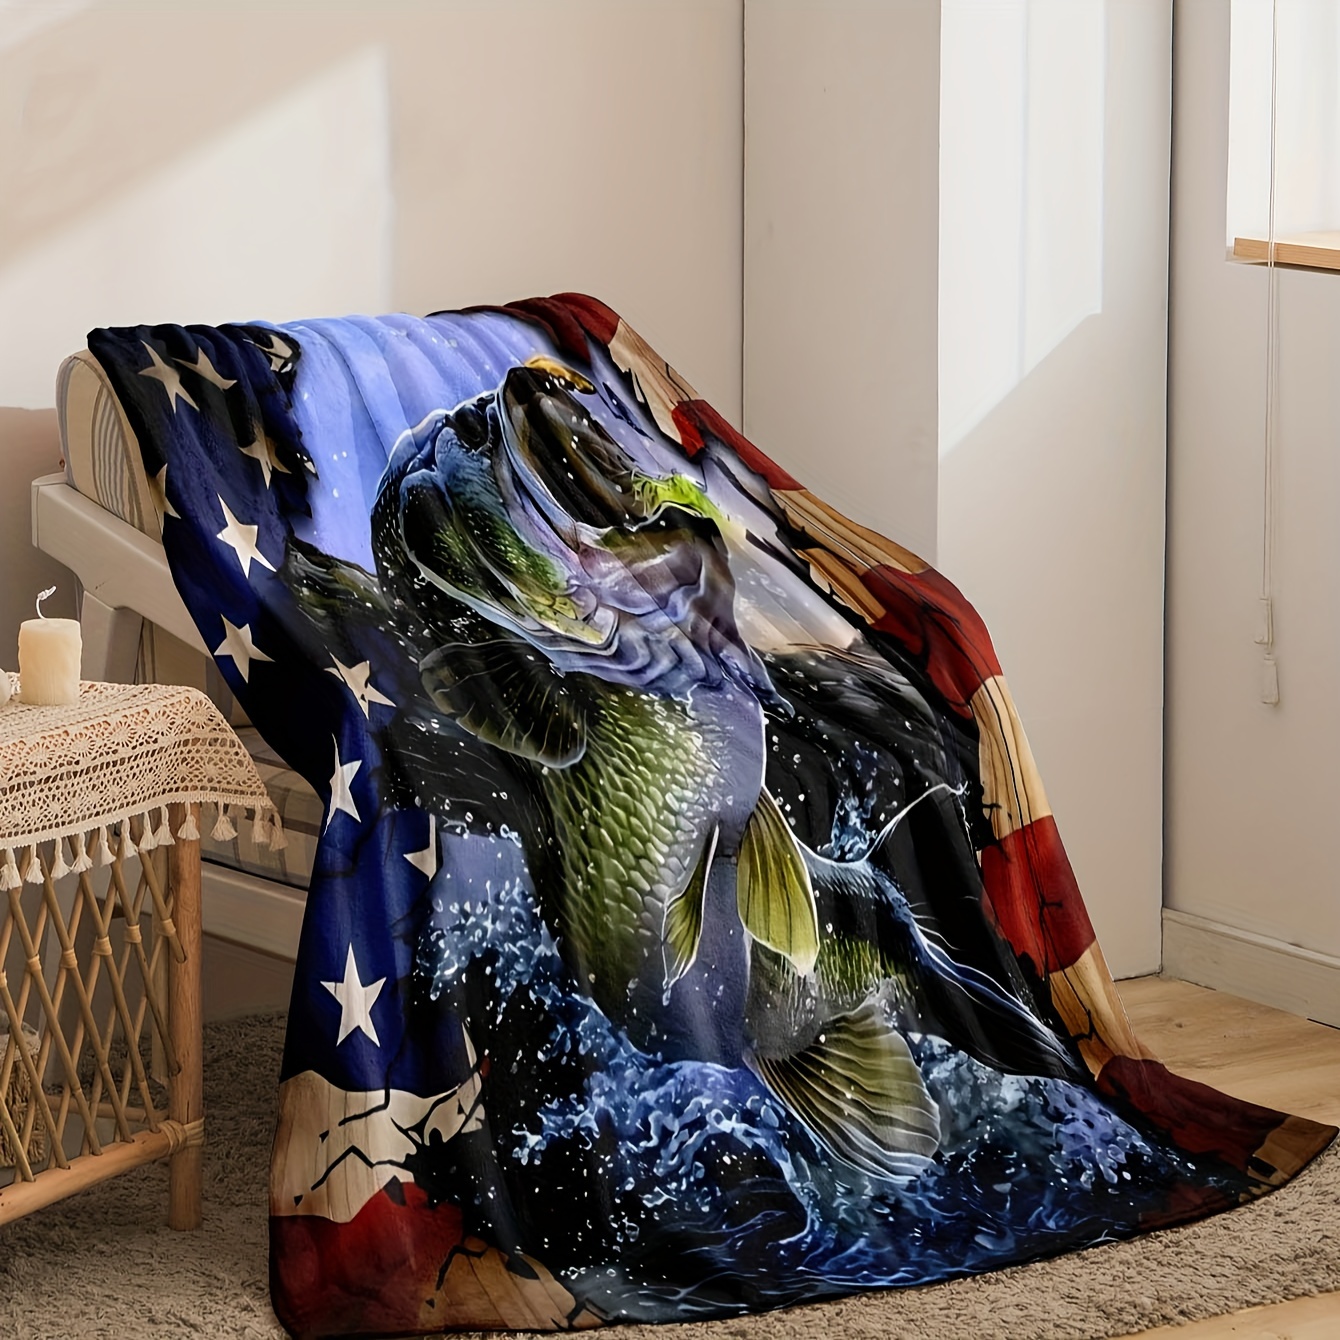 1pc Fishing Pattern Print Blanket, Flannel Blanket, Soft Warm Throw Blanket  Nap Blanket For Couch Sofa Office Bed Camping Travel, Multi-purpose Gift B